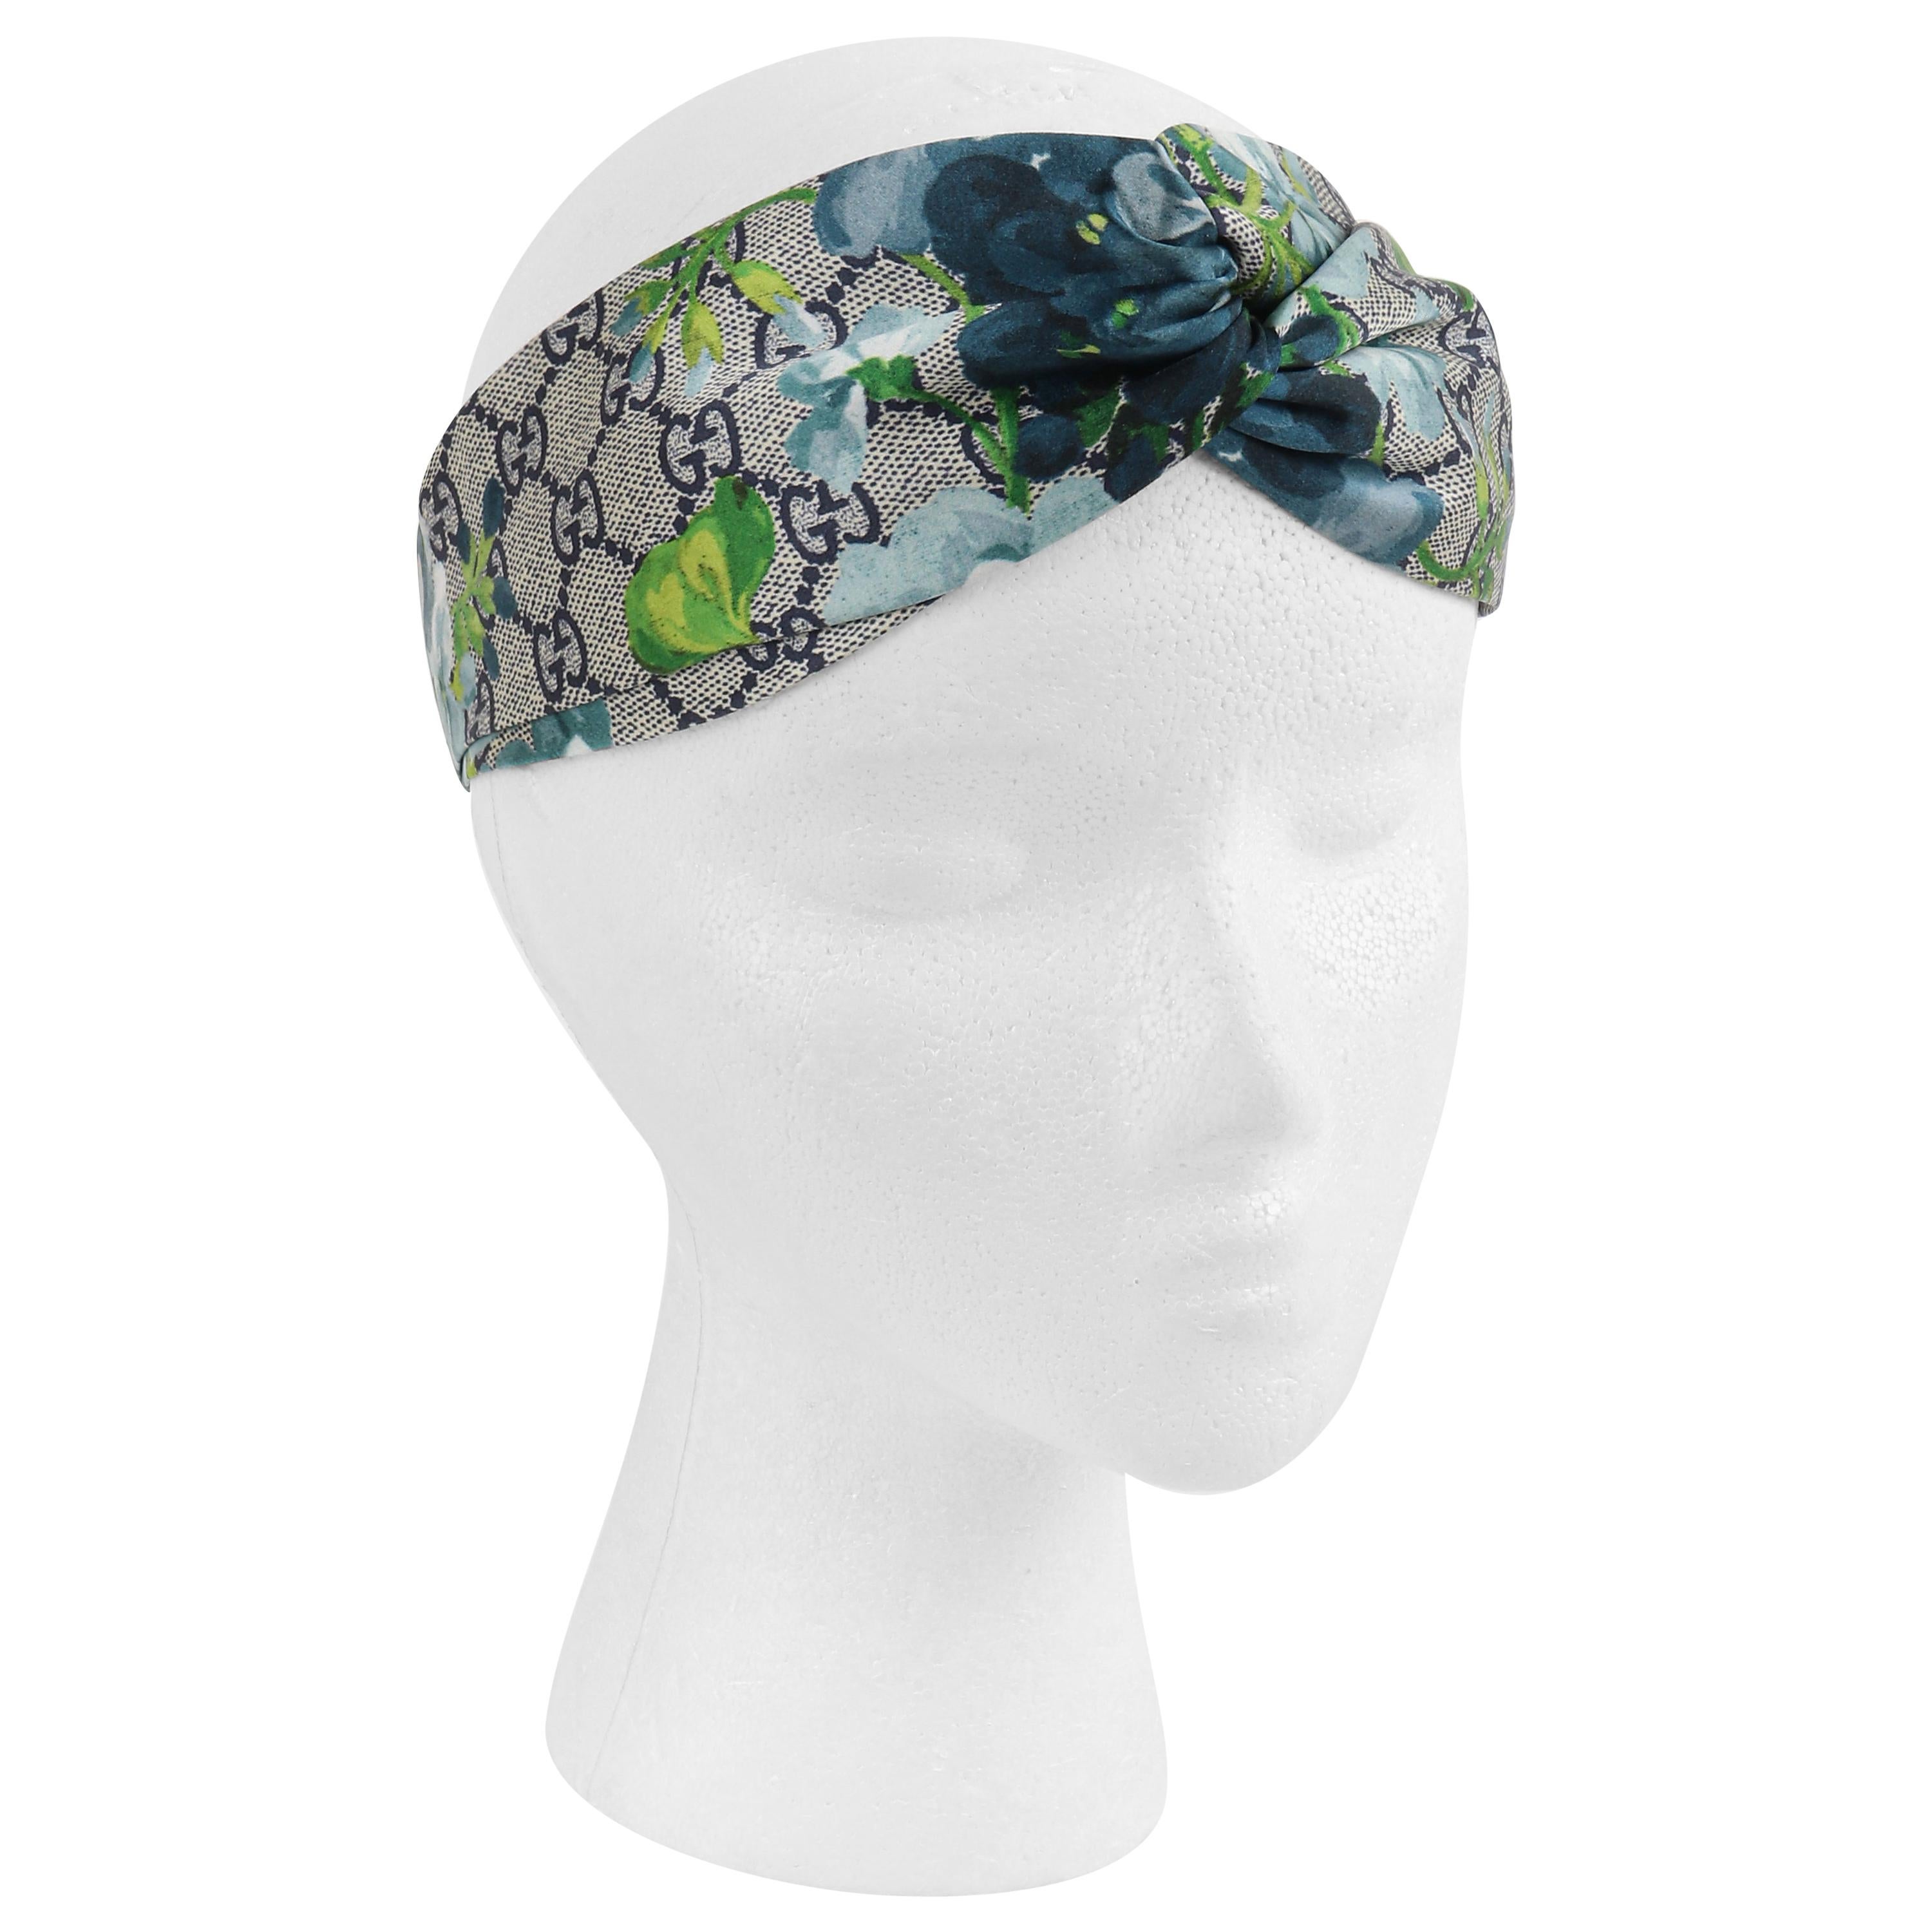 GUCCI c.2016 “Blooms” Blue Gray GG Monogram Floral Knotted Silk Headband NWT